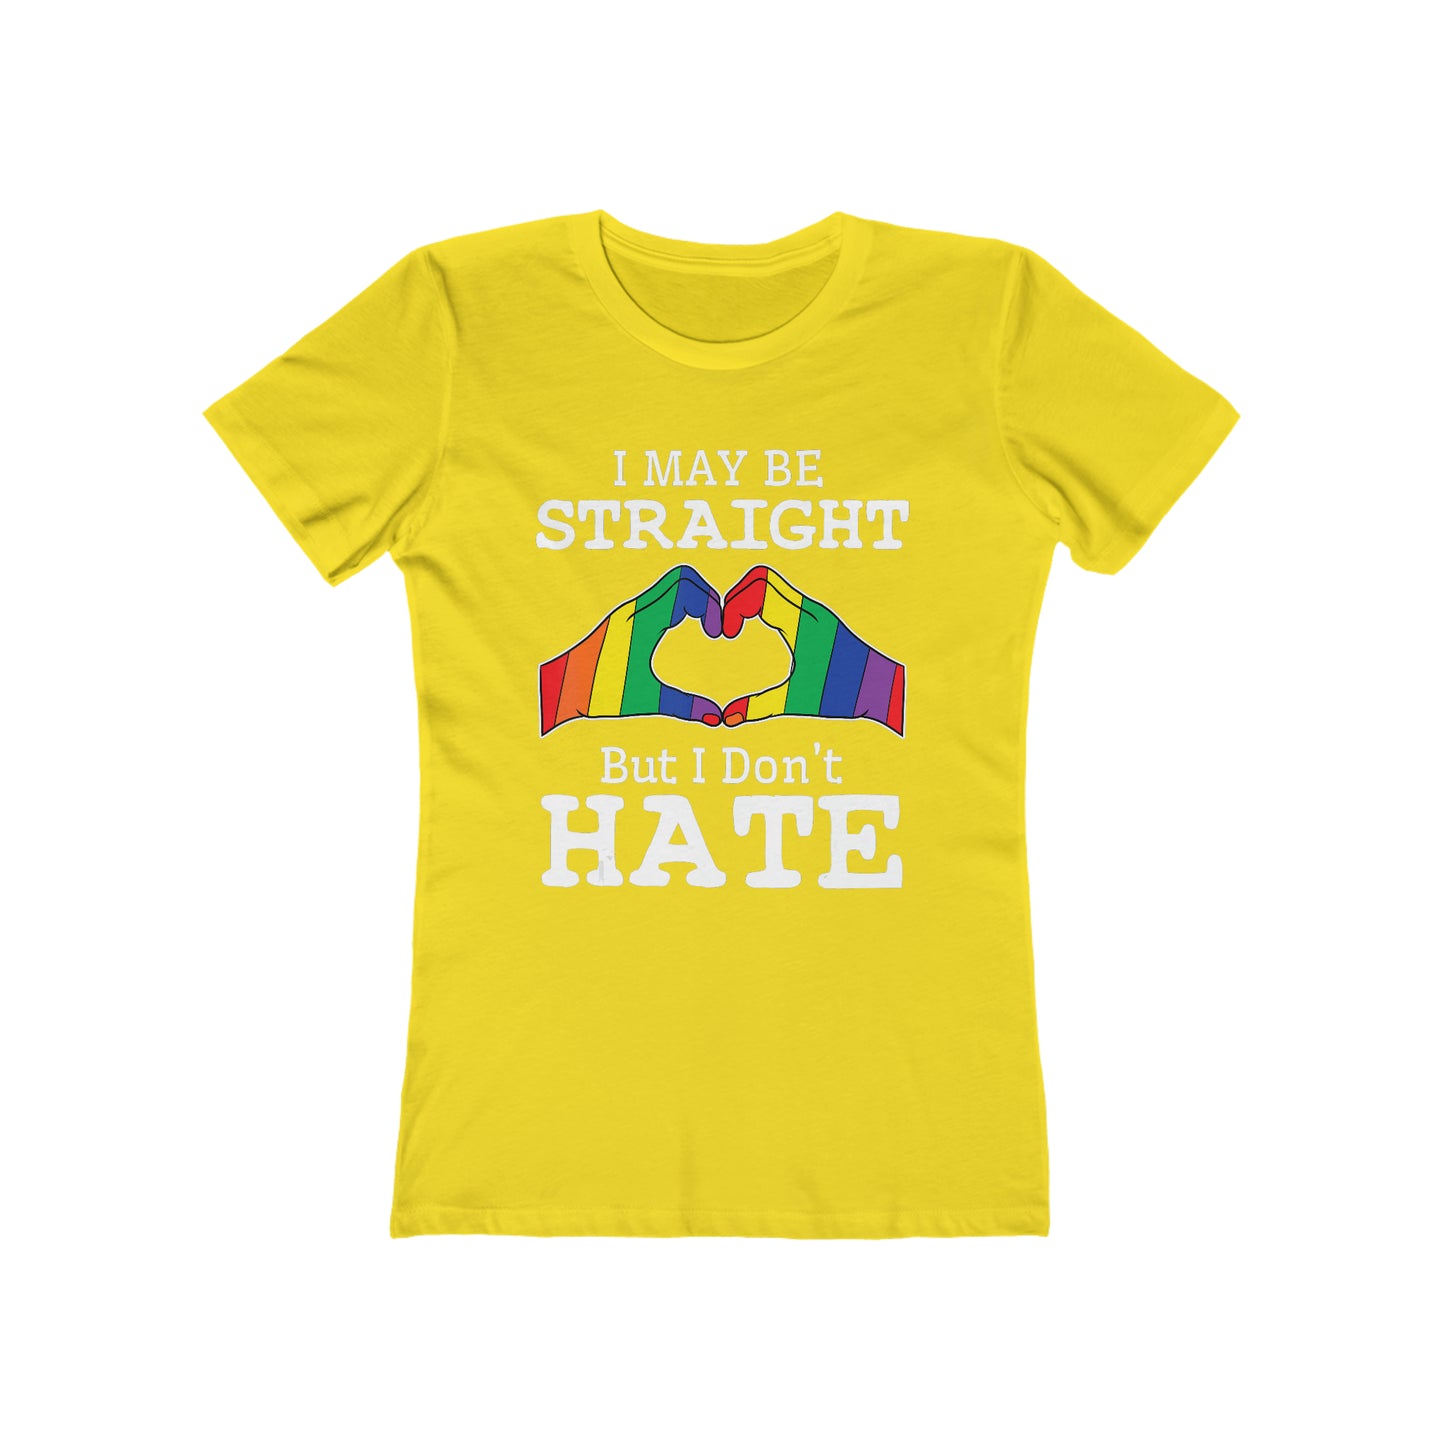 I May Be Straight But I Don't Hate - Women's T-shirt